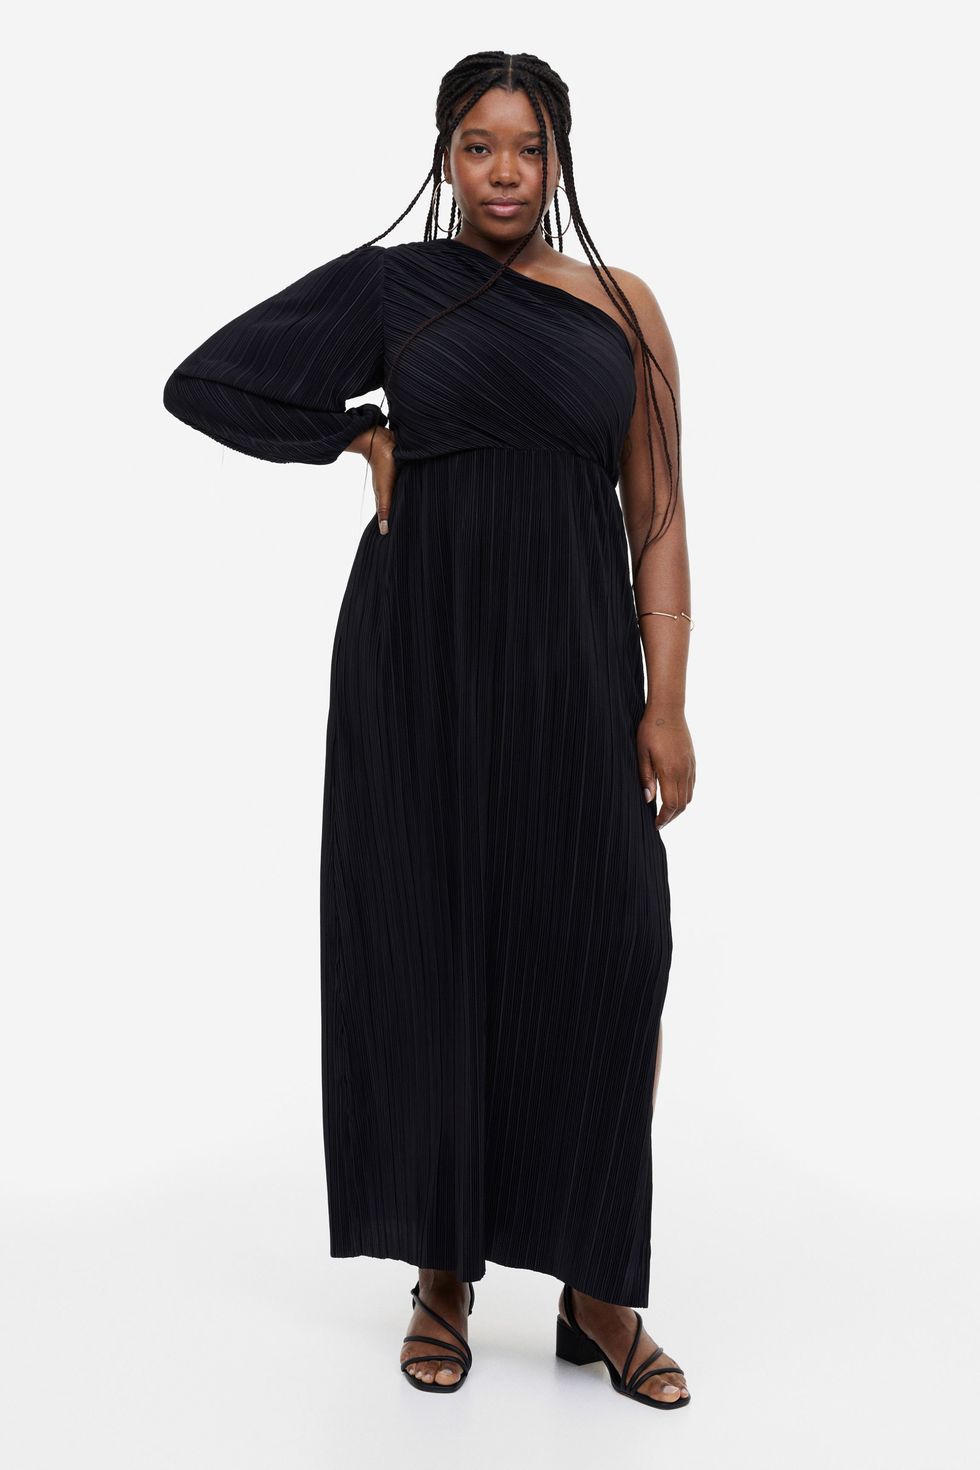 5 Flattering Plus Size Dresses for Any Occasion – Fresh Produce Clothes